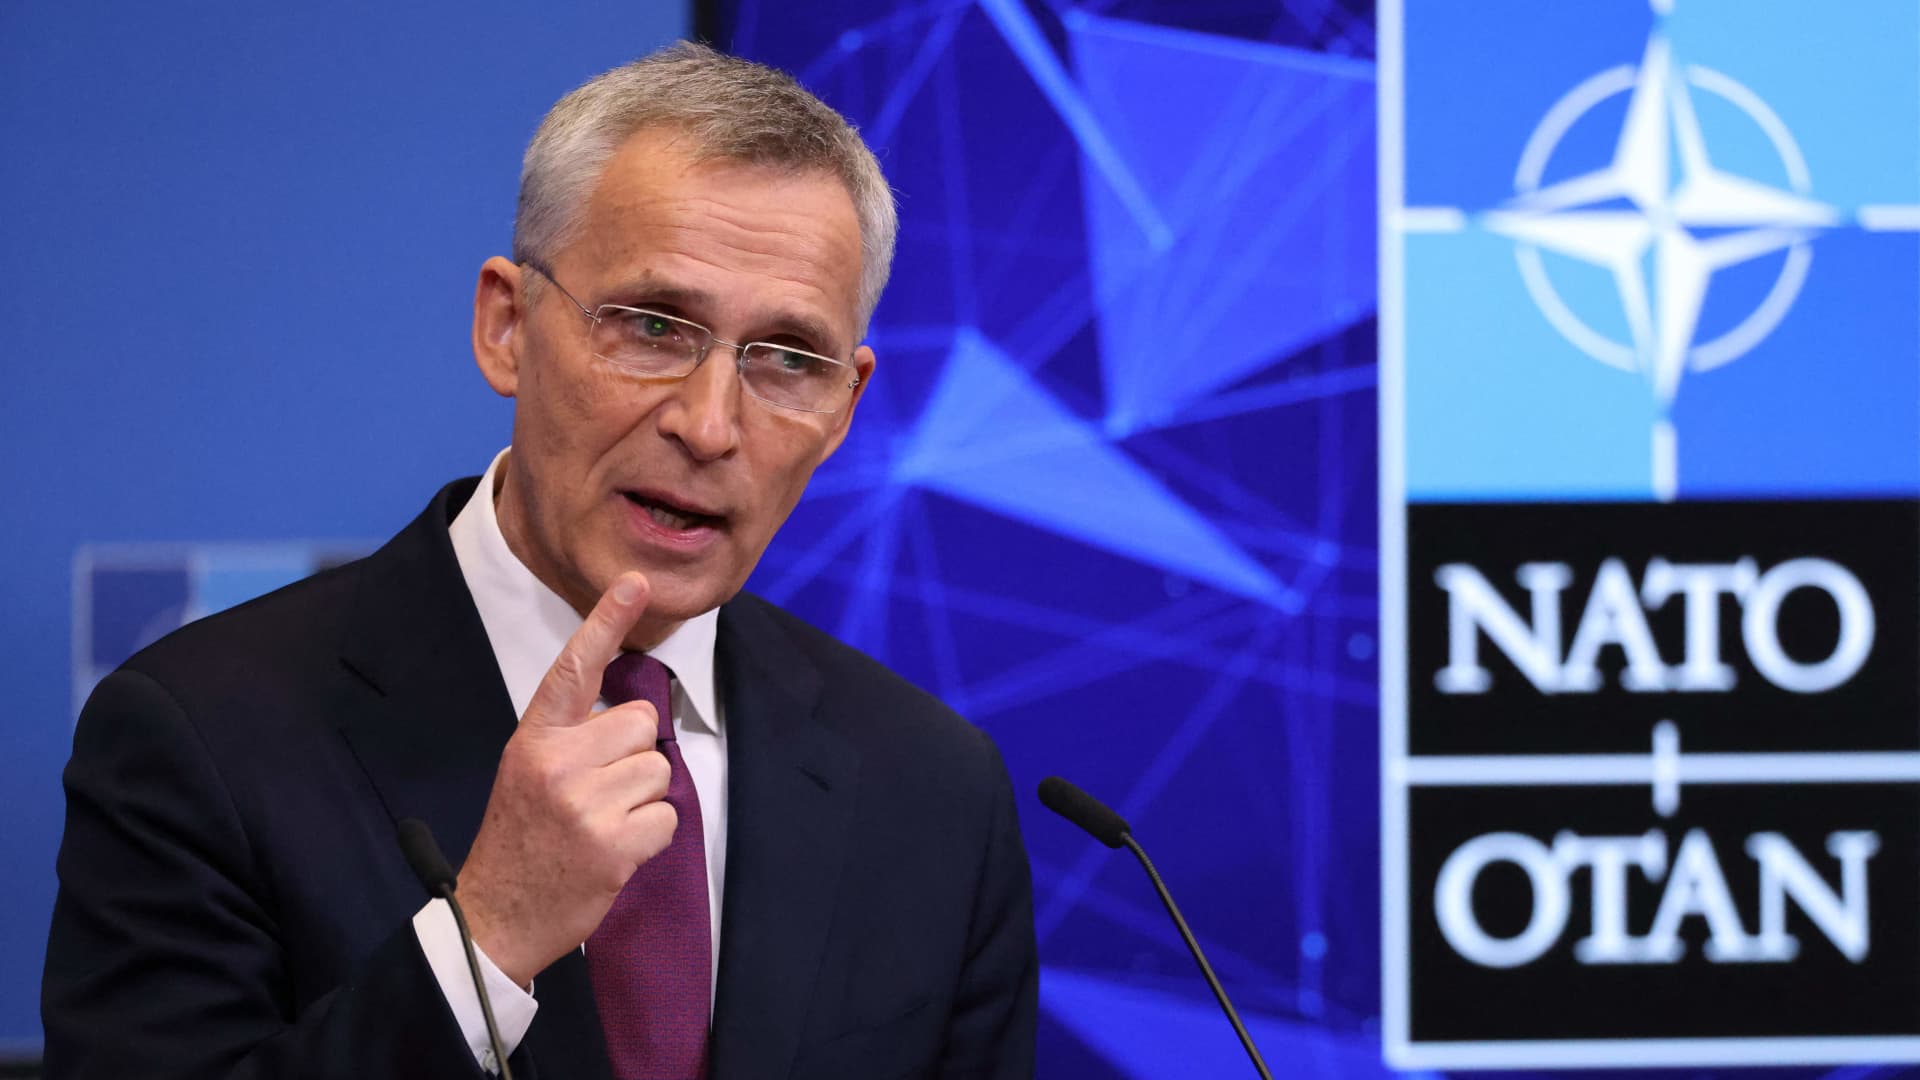 NATO is stronger than Russia alliance chief says; Moscow looks ready to sever ties with the West – CNBC